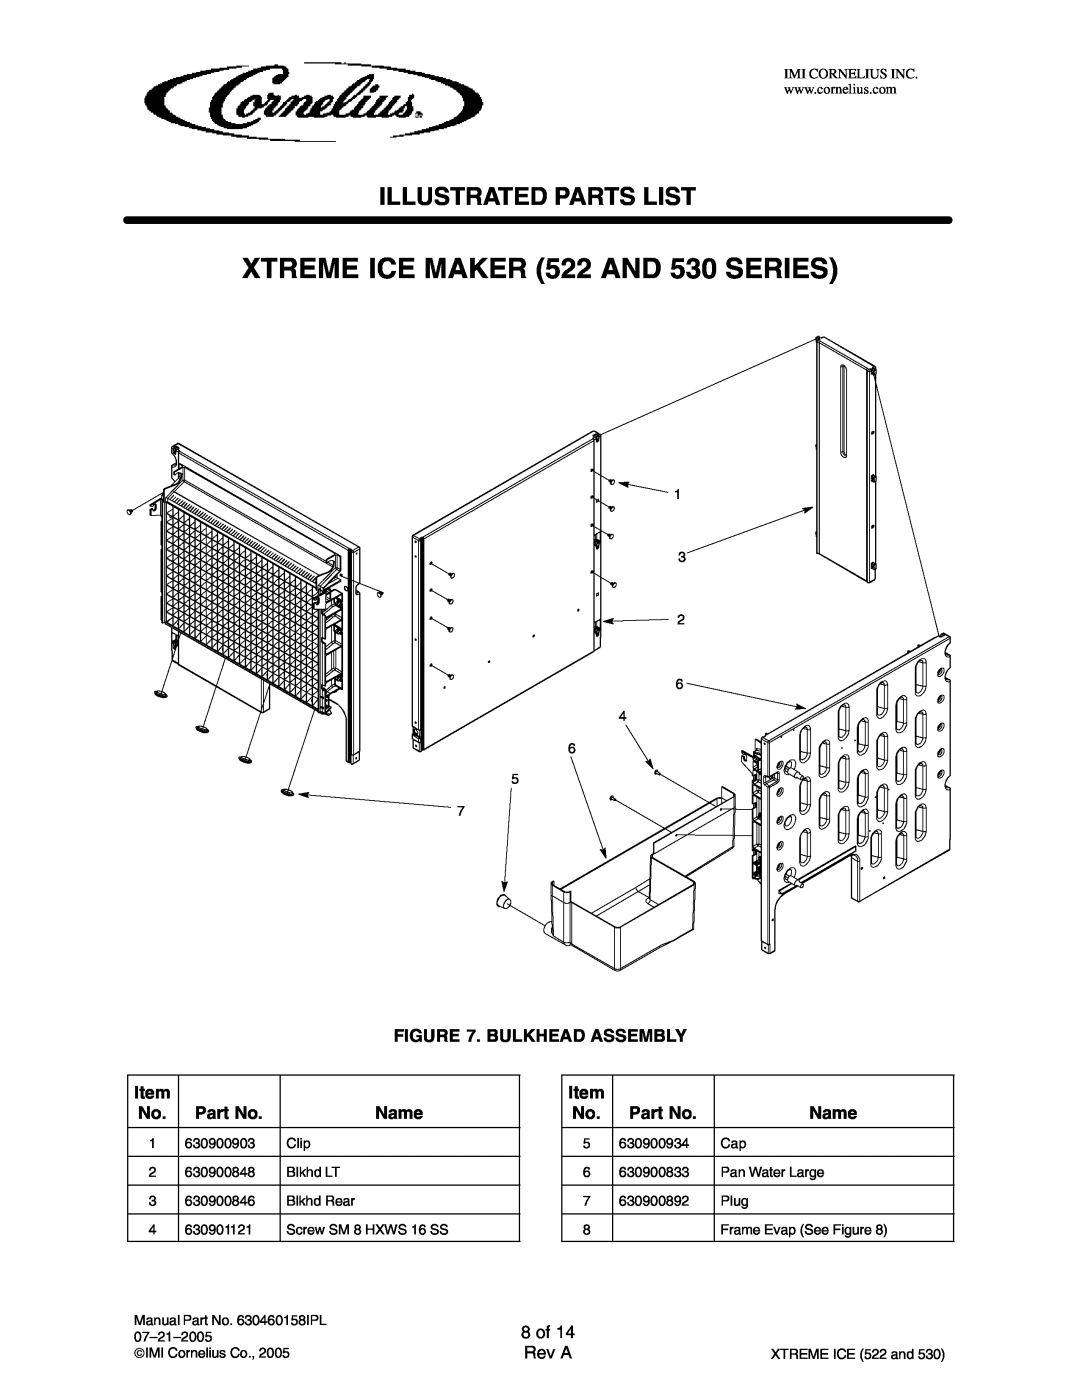 Cornelius 631805030 Bulkhead Assembly, 8 of, XTREME ICE MAKER 522 AND 530 SERIES, Illustrated Parts List, Name, Rev A 